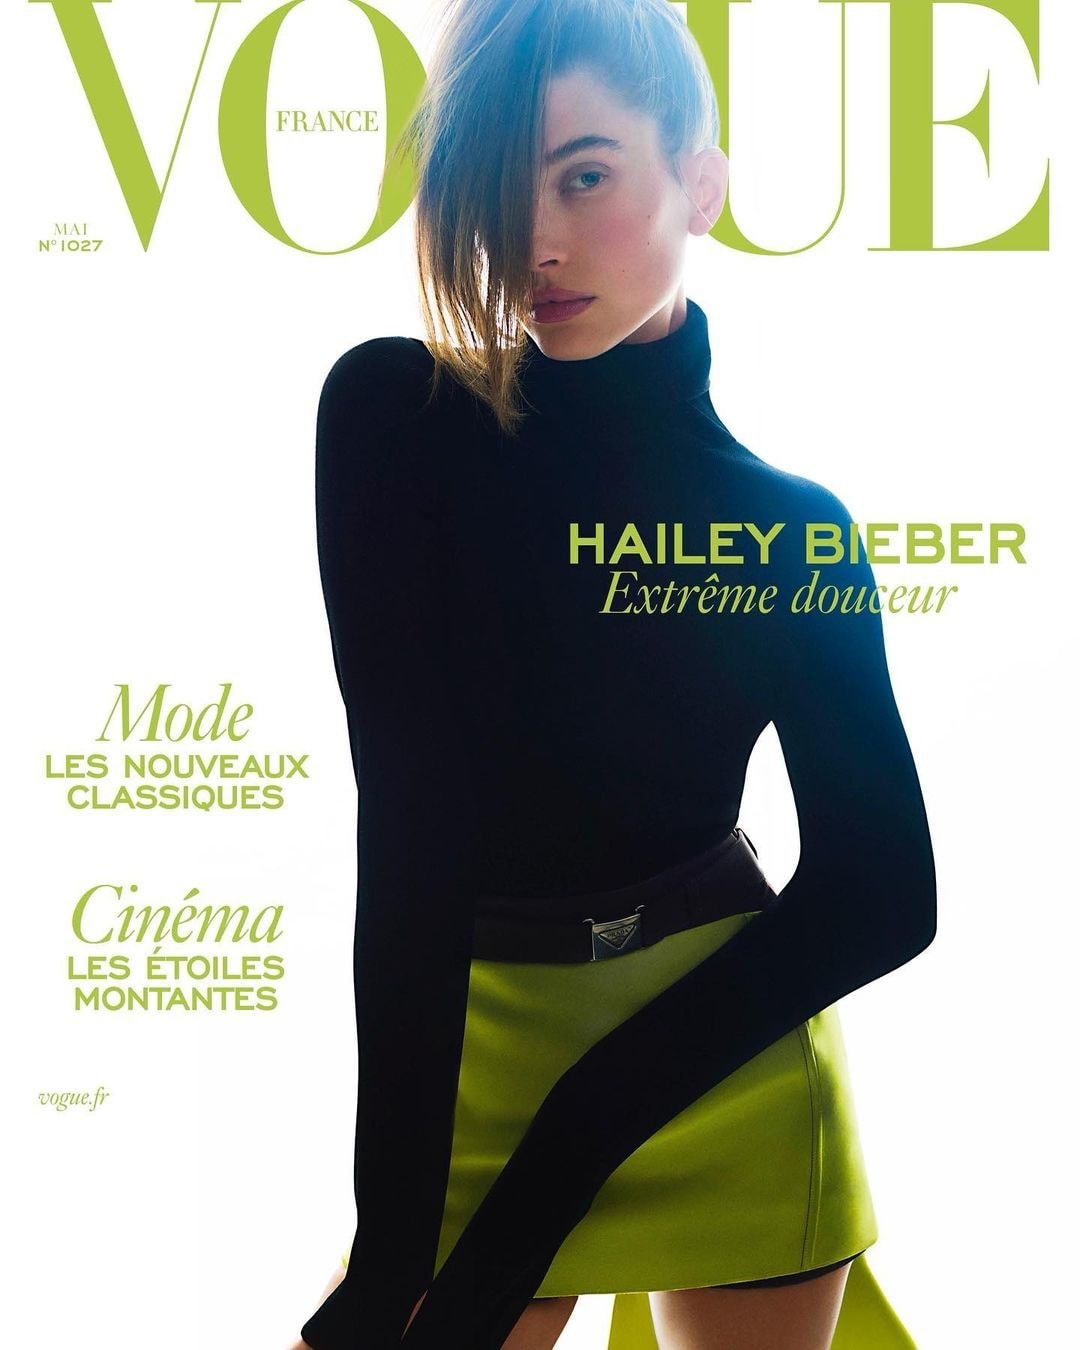 Hailey Bieber on the cover of the latest issue of Vogue France